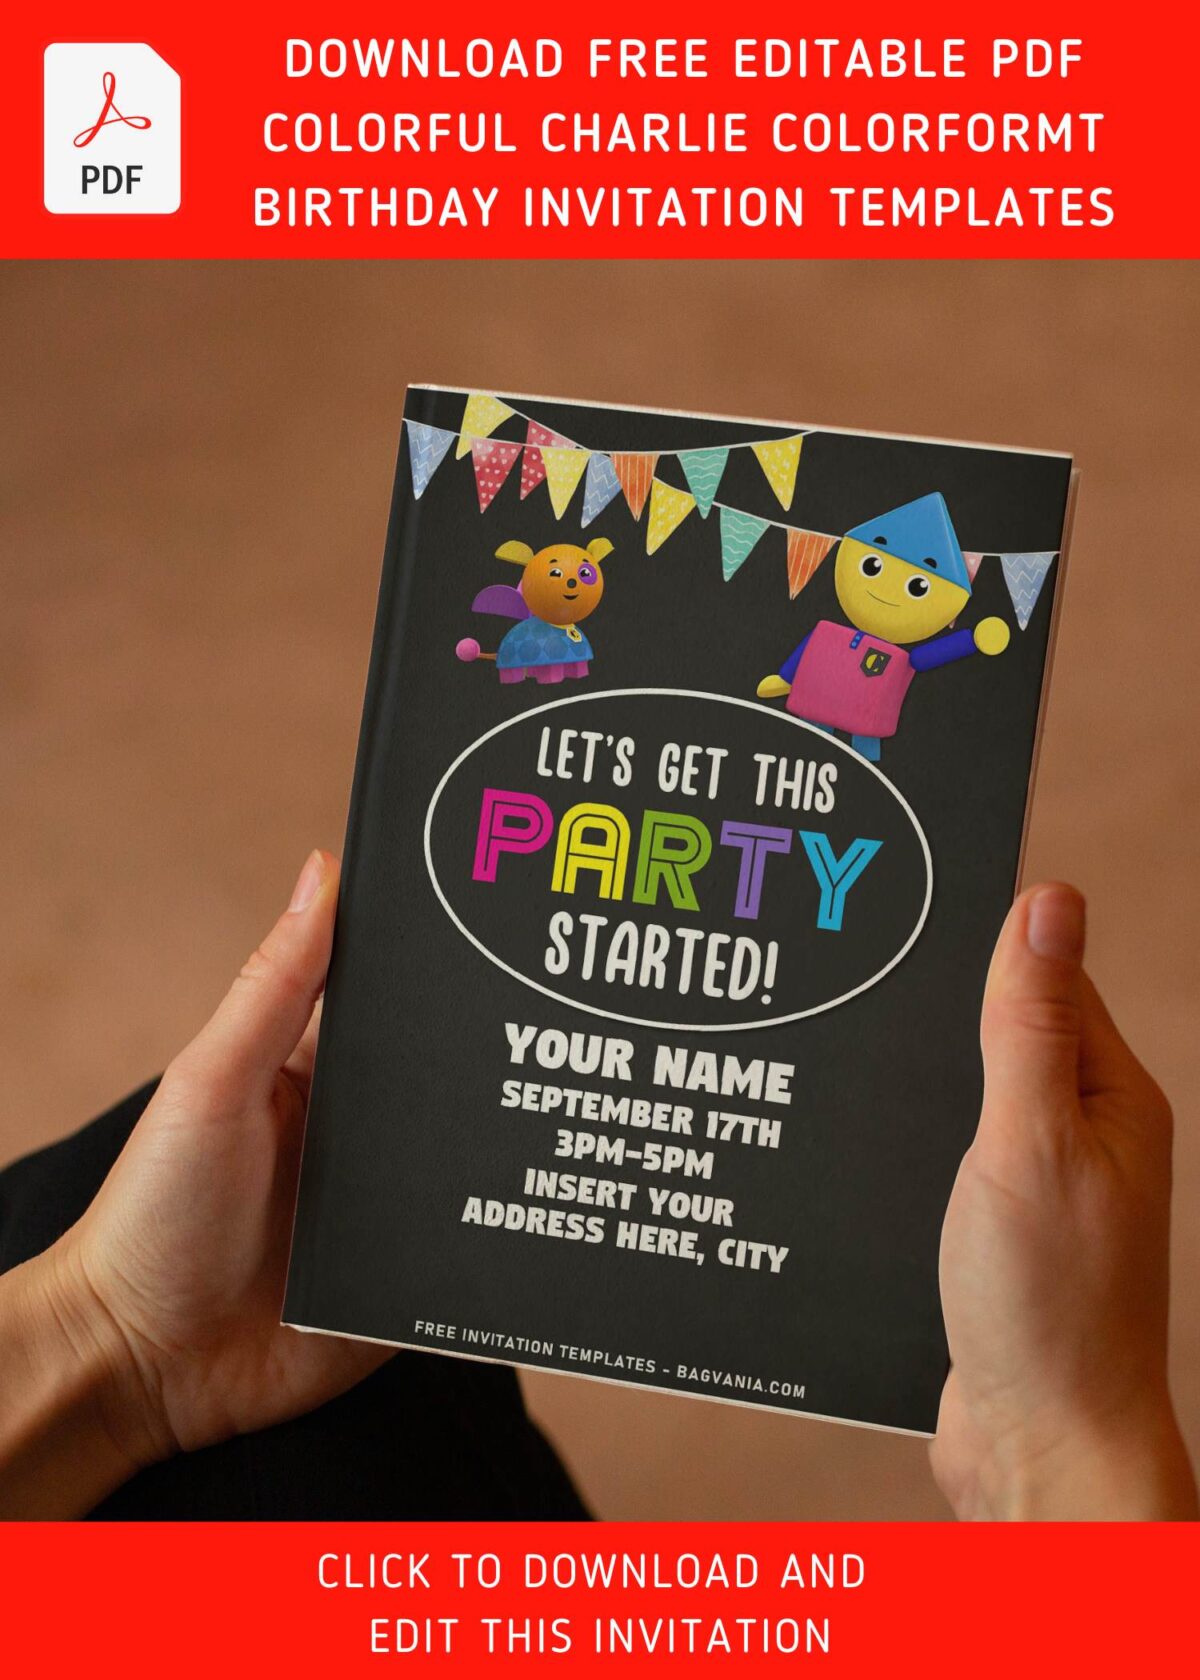 (Free Editable PDF) Chalkboard Charlie's Colorform City Birthday Invitation Templates with colorful text